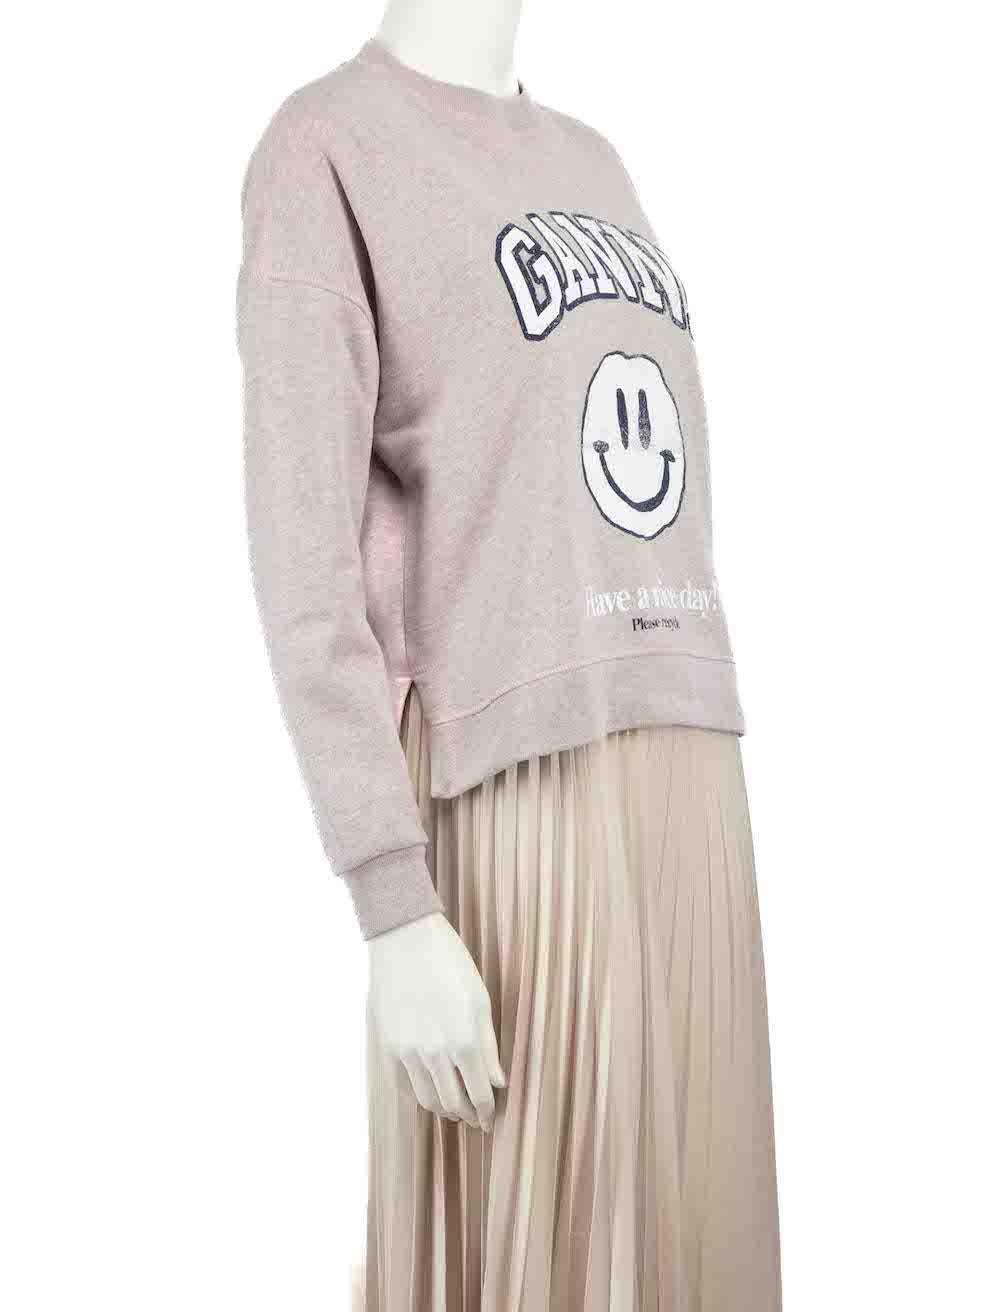 CONDITION is Very good. Hardly any visible wear to sweatshirt is evident on this used Ganni designer resale item.
 
 
 
 Details
 
 
 Light pink
 
 Cotton
 
 Sweatshirt
 
 Logo and smiley face graphic print
 
 Long sleeves
 
 Round neck
 
 
 
 
 
